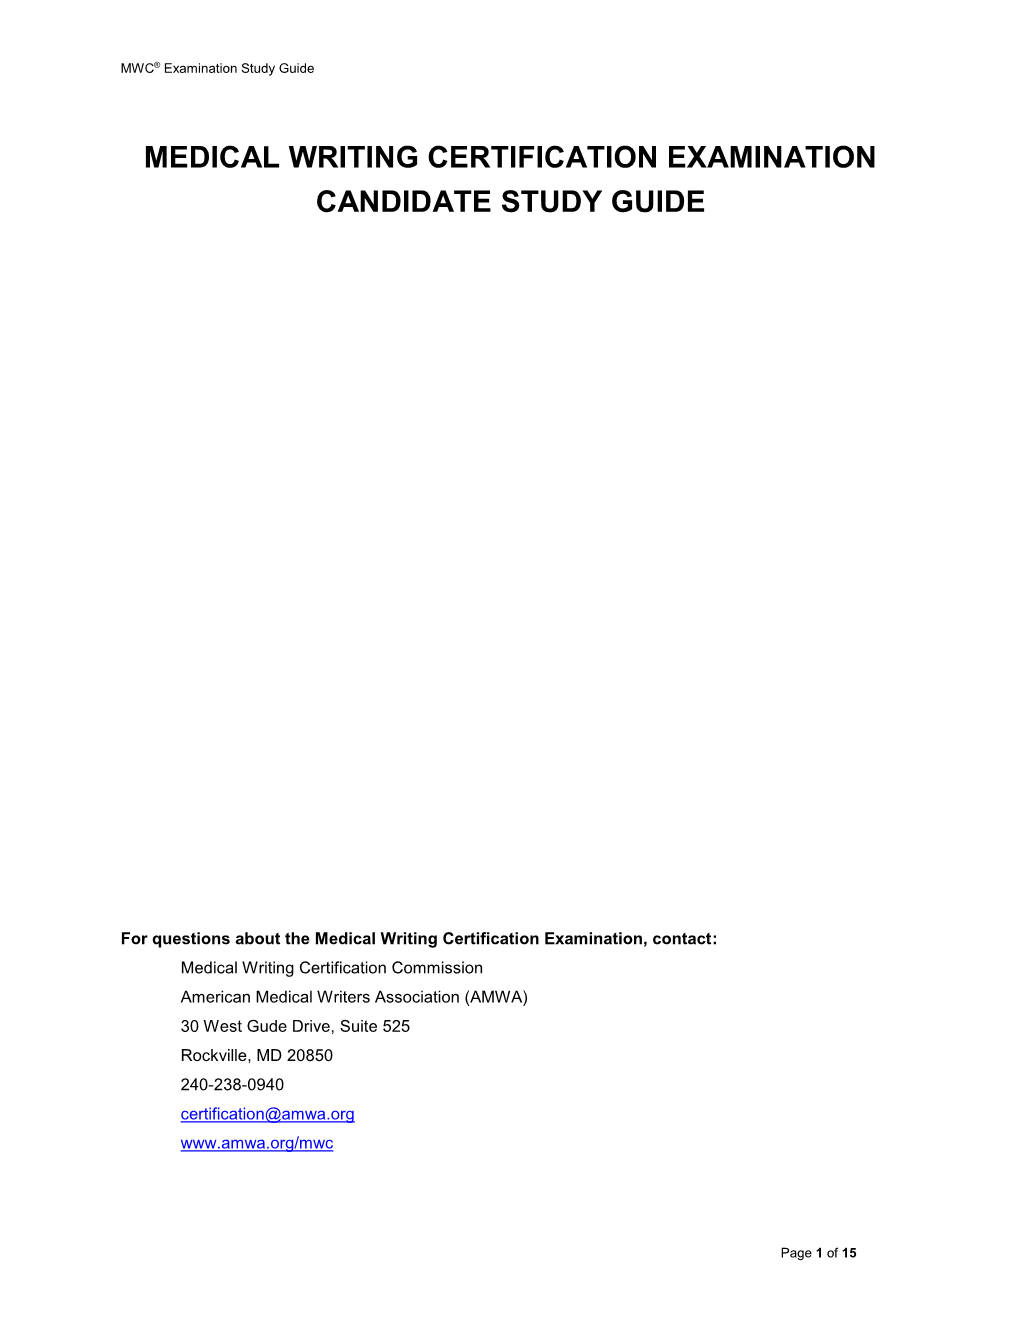 Medical Writing Certification Examination Candidate Study Guide